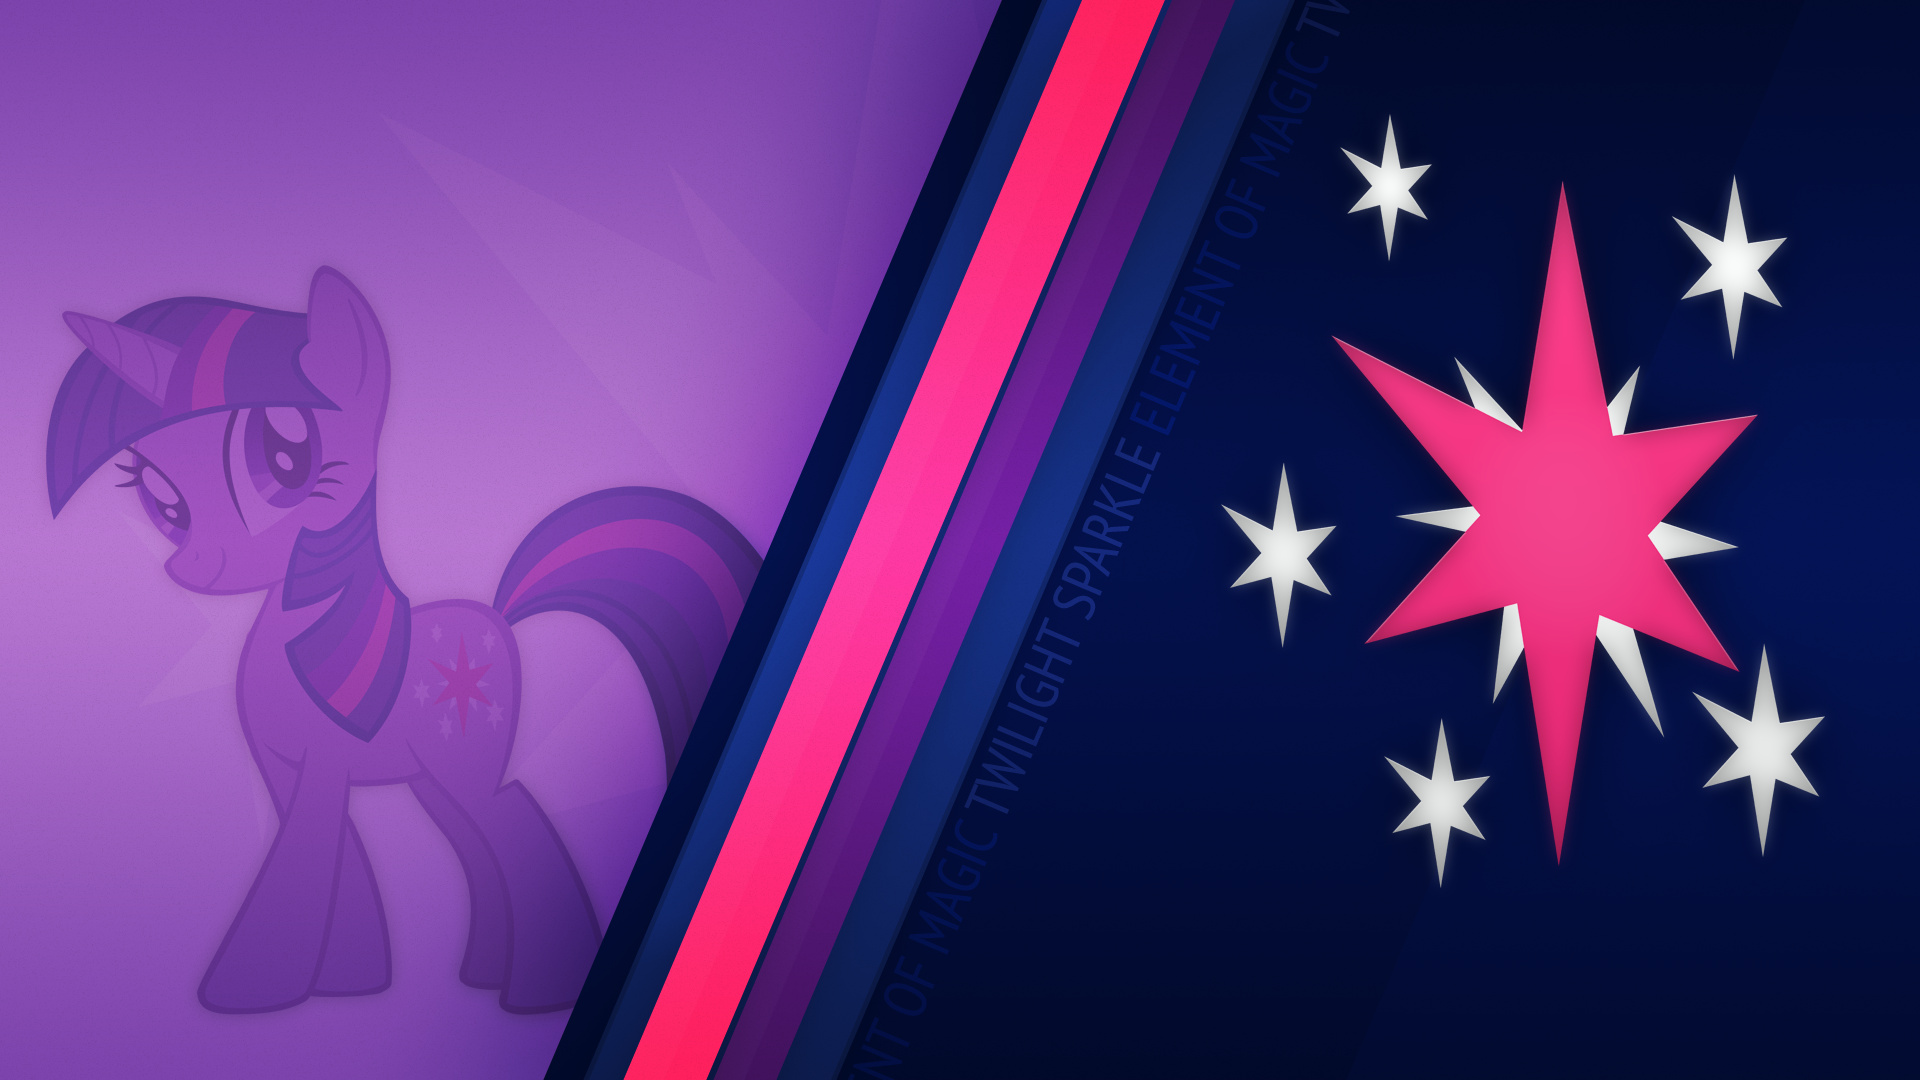 Twilight Sparkle CM Wallpaper by Bardiel83, GuruGrendo and Tigersoul96